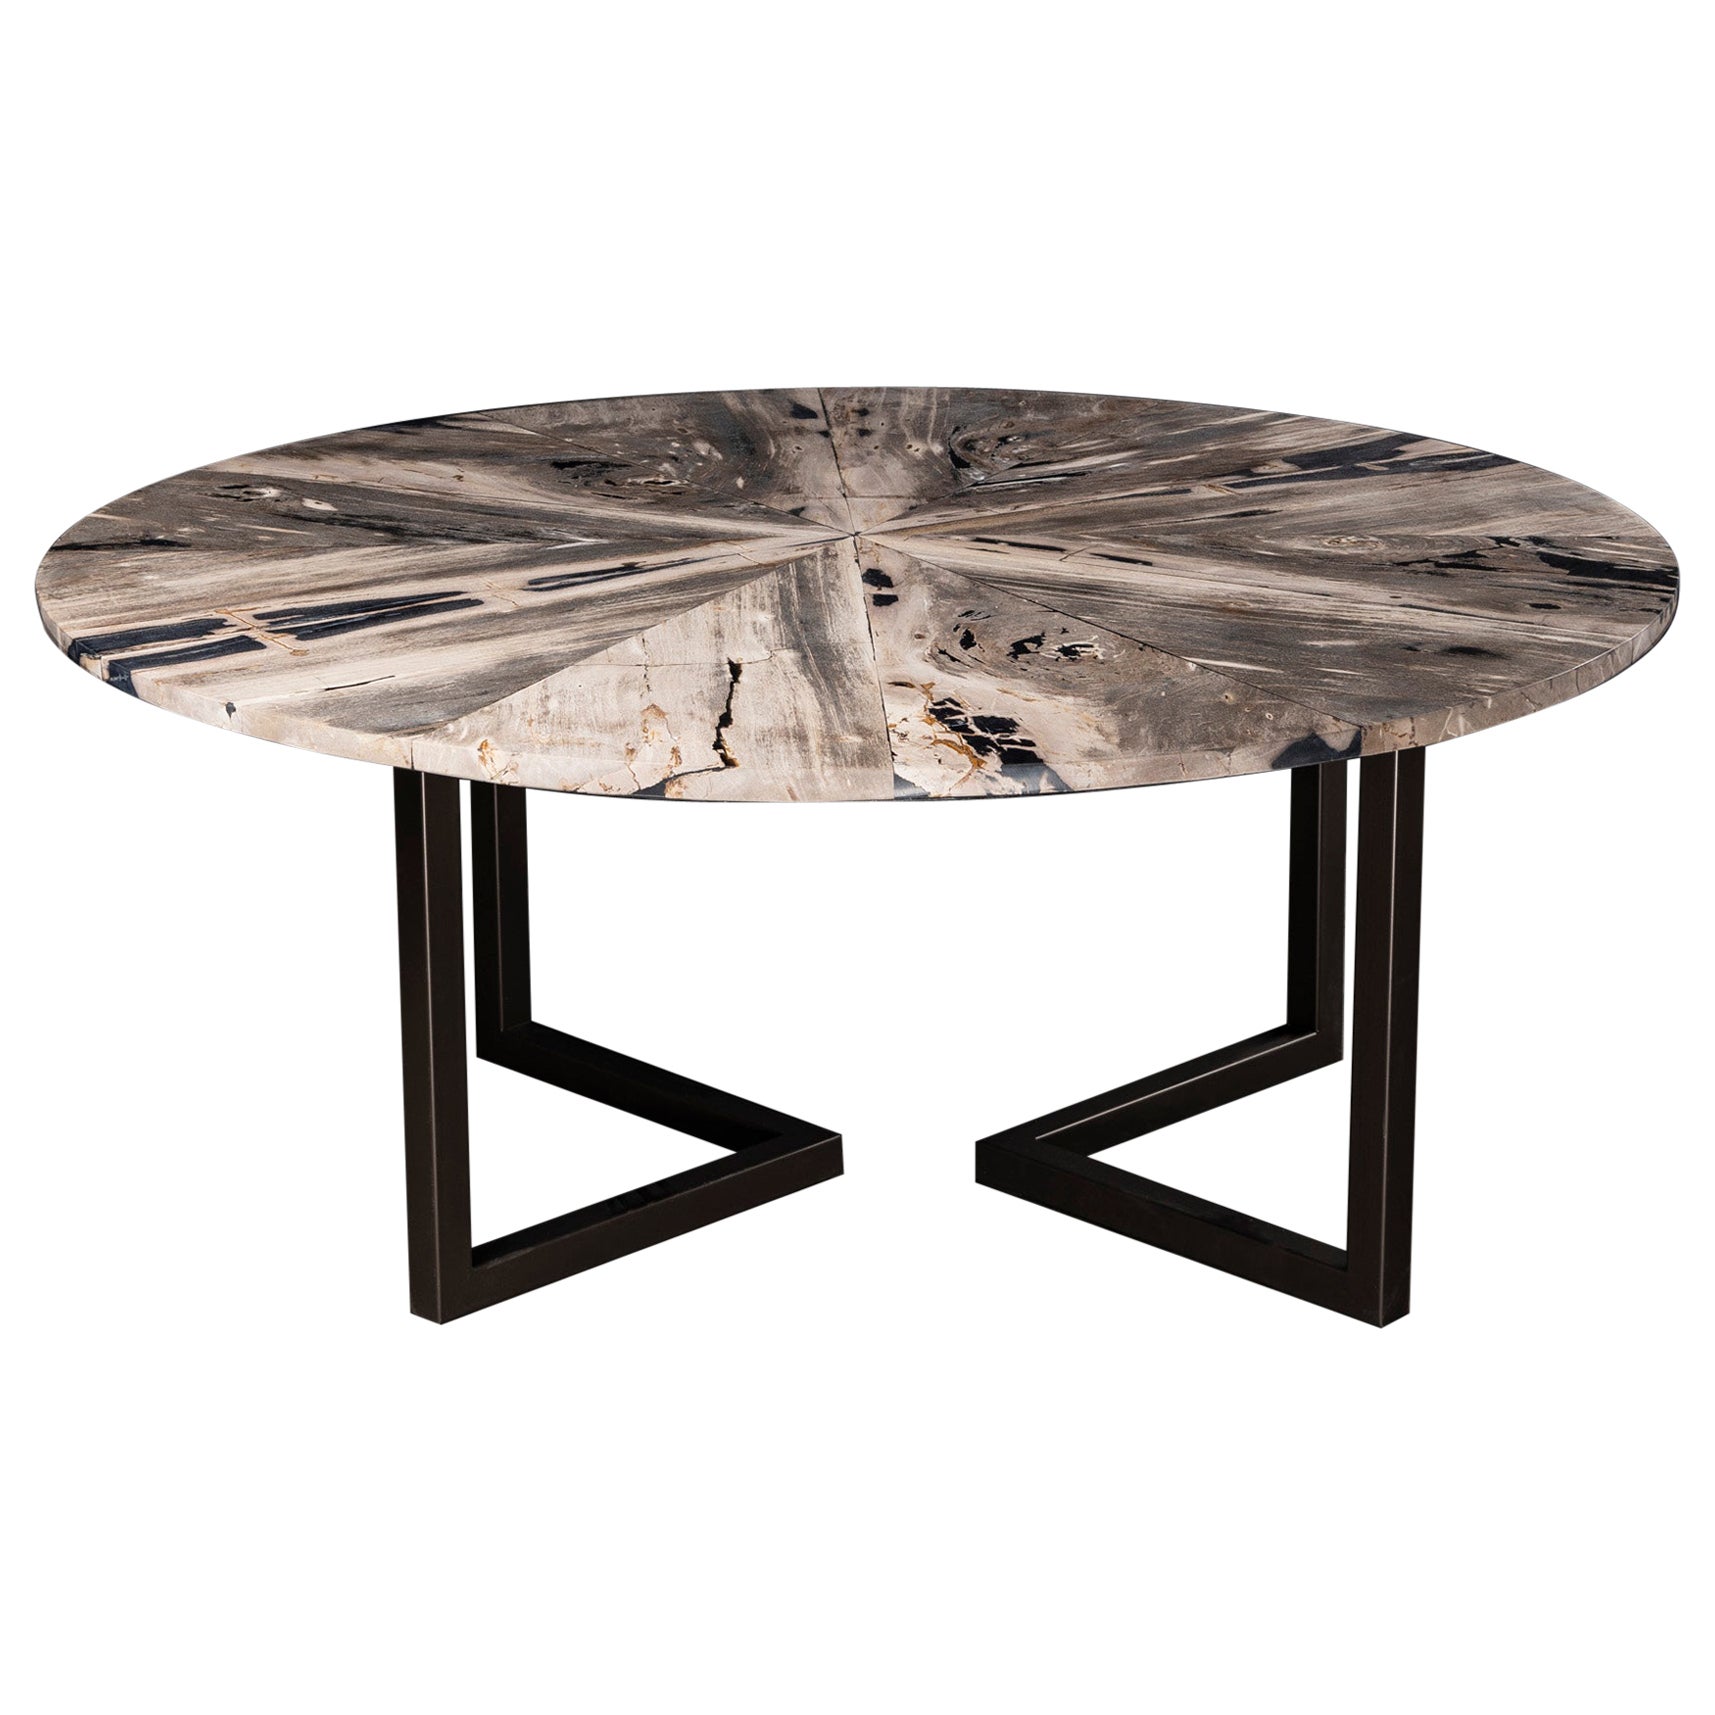 72" Round Petrified Wood Dinning Table with Metal Base For Sale